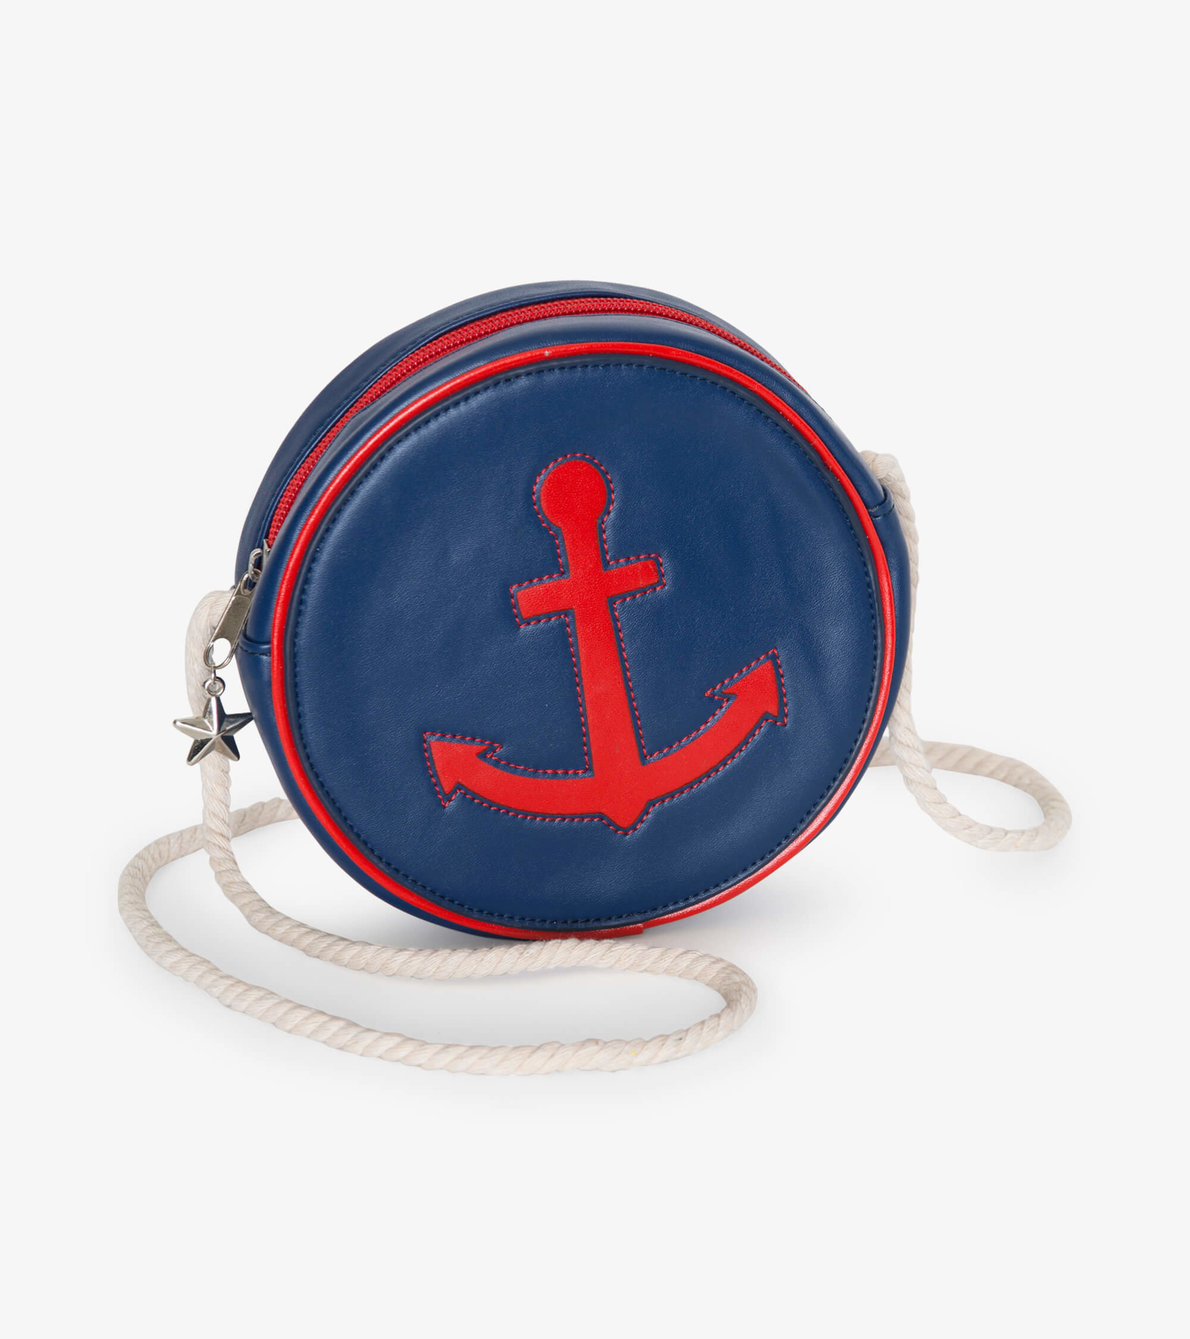 View larger image of Nautical Anchor Cross Body Bag